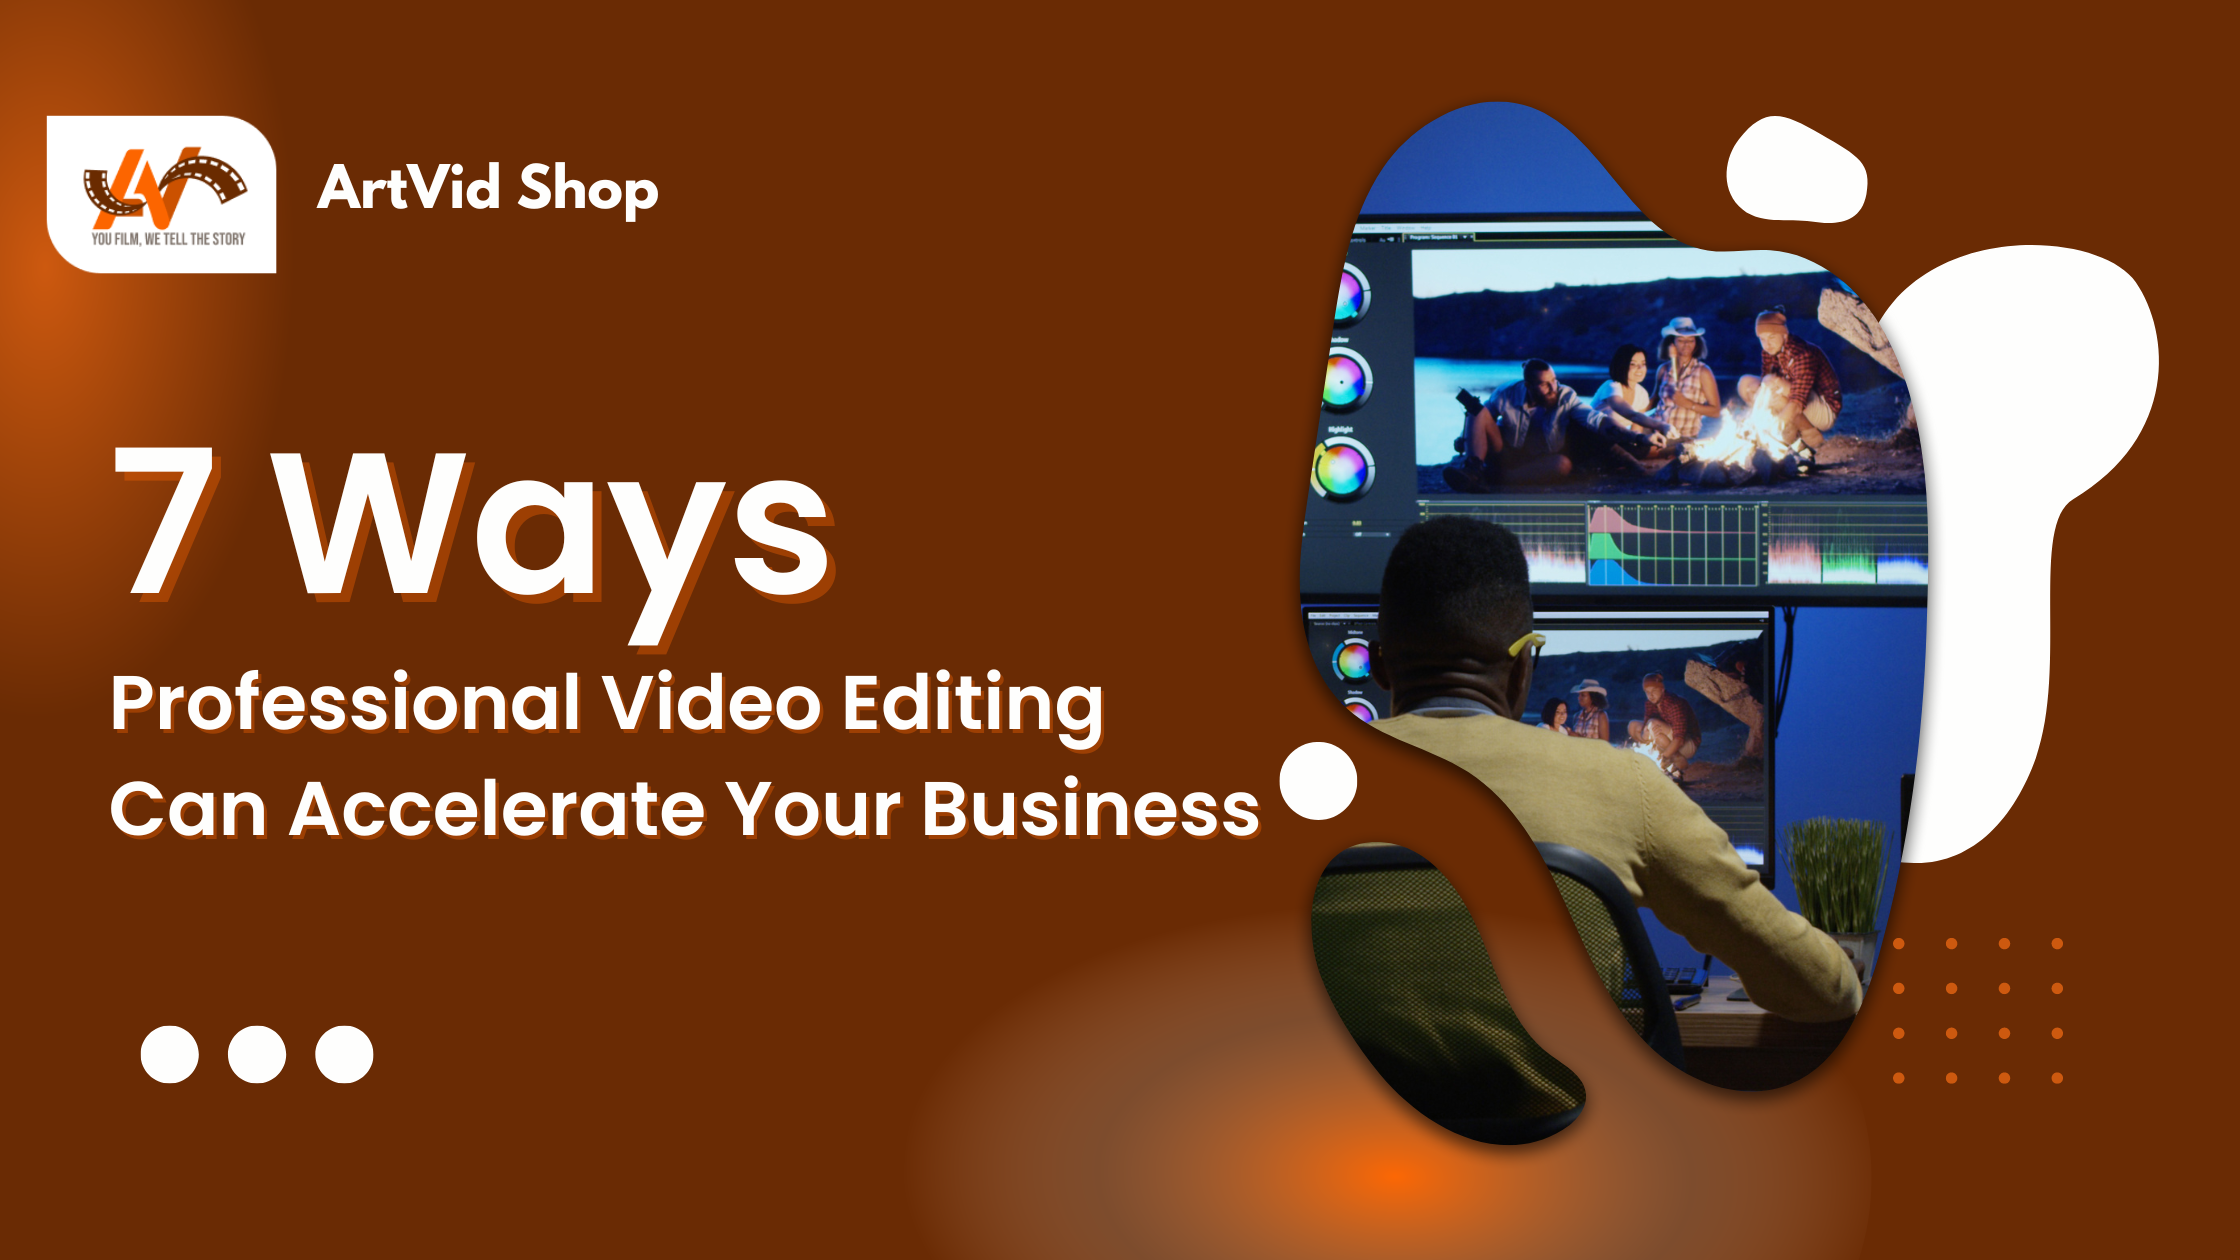 Professional Video Editing Can Accelerate Your Business